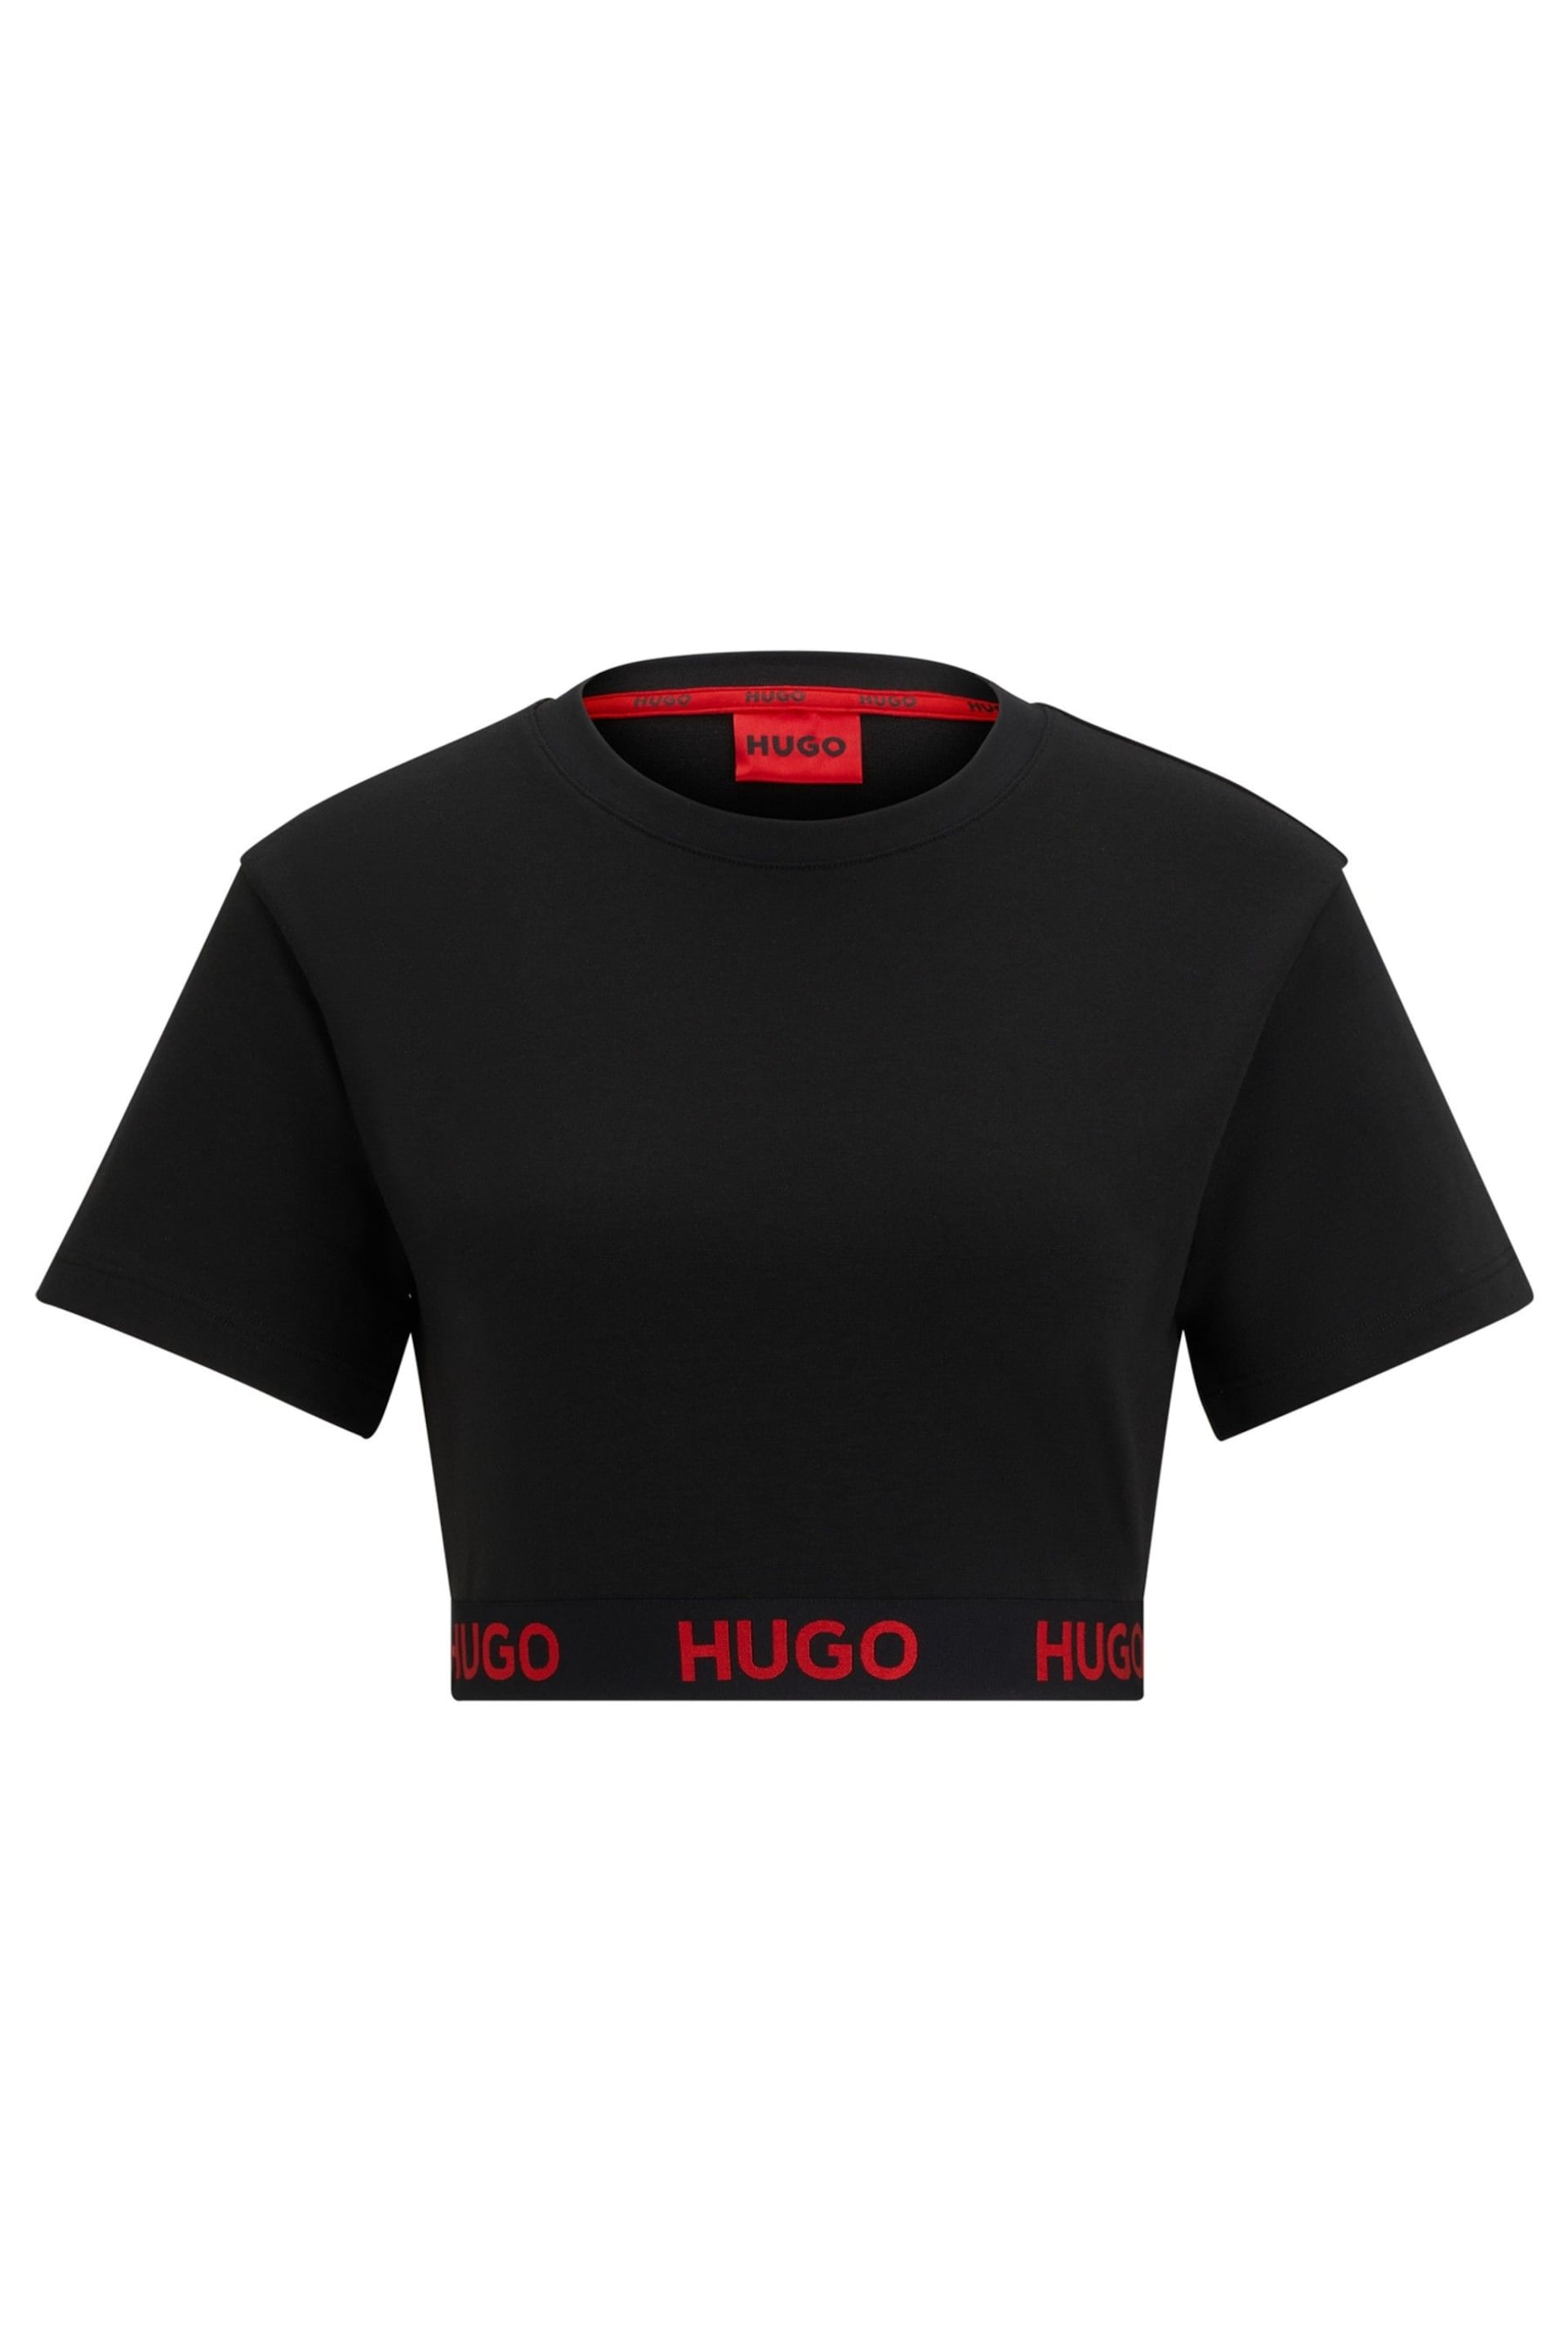 HUGO Cropped Black T-Shirt in Stretch Fabric With Logo Waistband Crop Top - Image 6 of 6